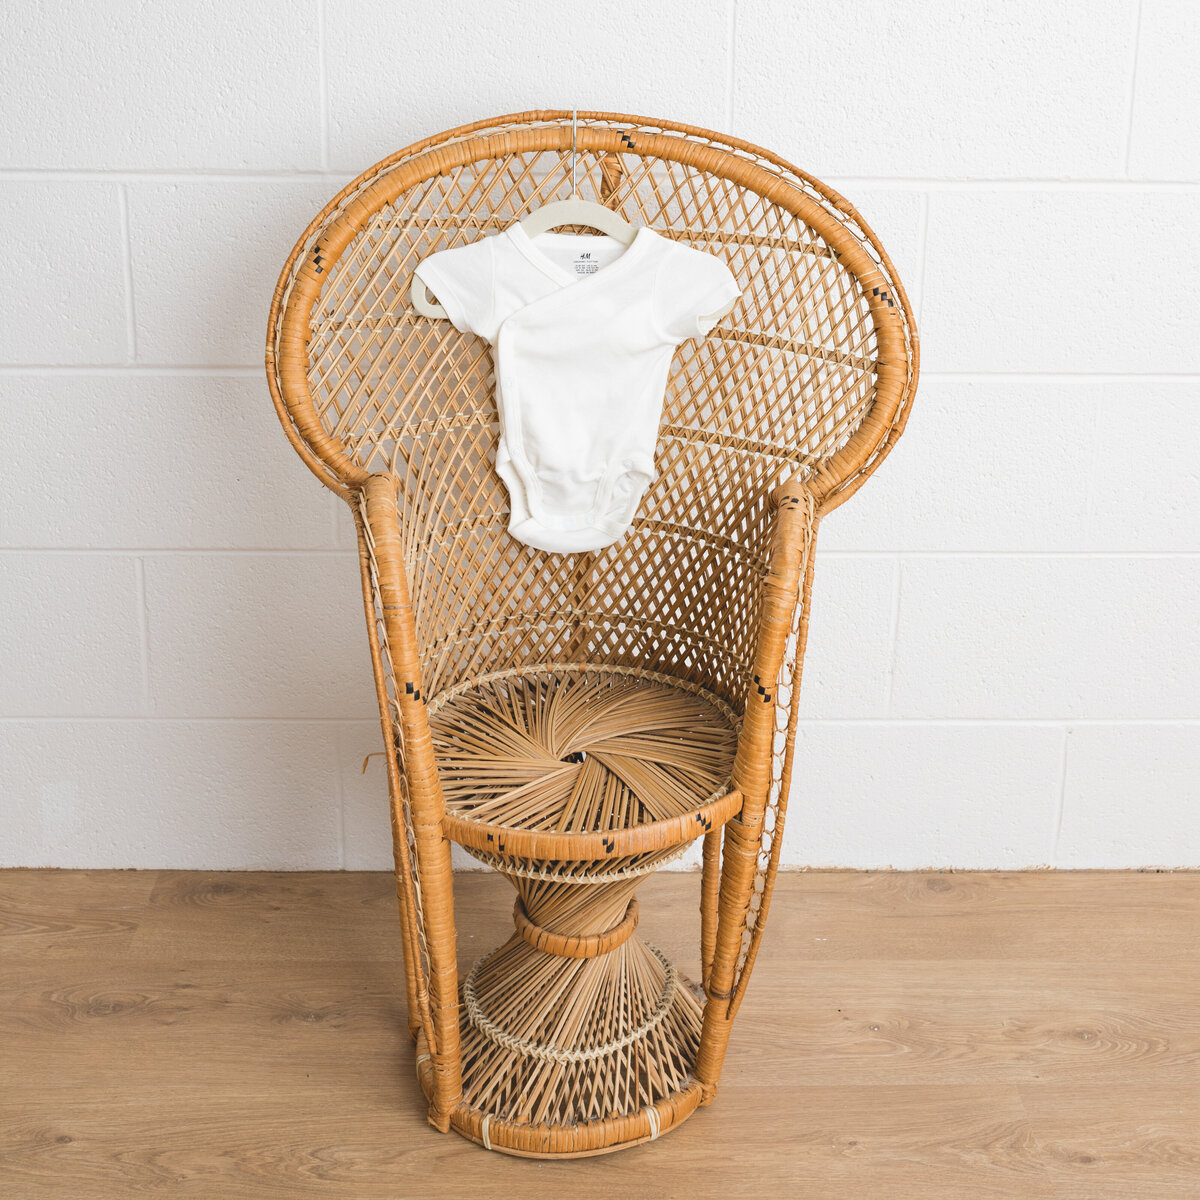 Image depicts a miniature peacock chair in a photography studio on the chair hangs a tiny newborn outfit in white knit .  This image is a sample of Lauren Vanier Photography's newborn client wardrobe. Image taken in Hobart Tasmania